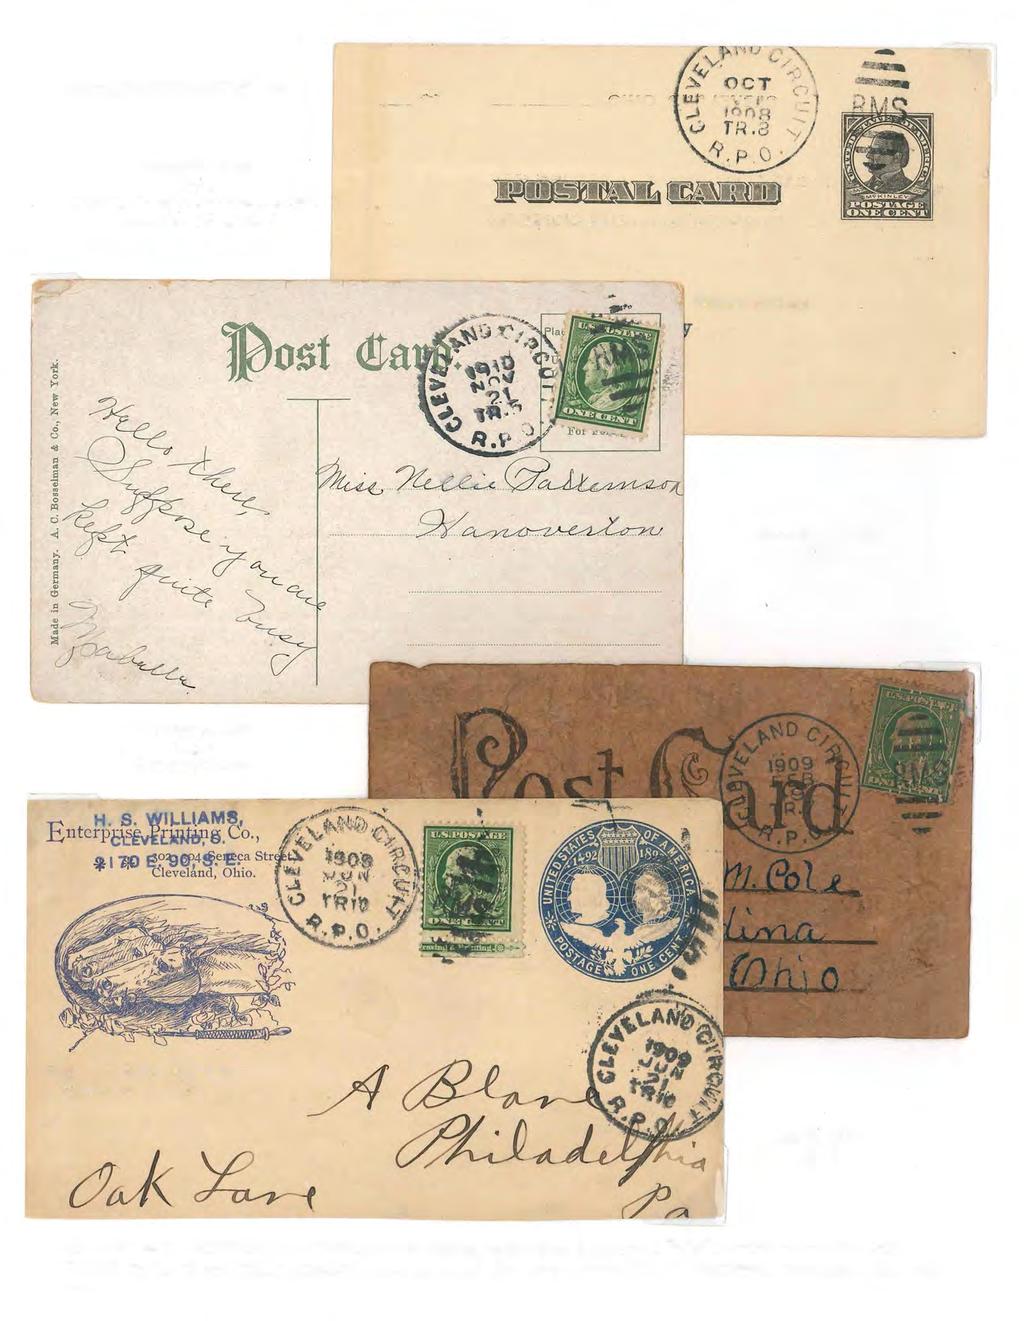 - Handstamp-First Die October 31, 19 08 Year slug below the date only in 1908 Fewer than JO reported THE SPACE BELOW IS FOR THE ADDRESS ONLY. Correction. r. November 21, 19 10 Trip 5 February 9, 19 09 Trip 7 Leather postcard Fair and Race Printing a Specialty.